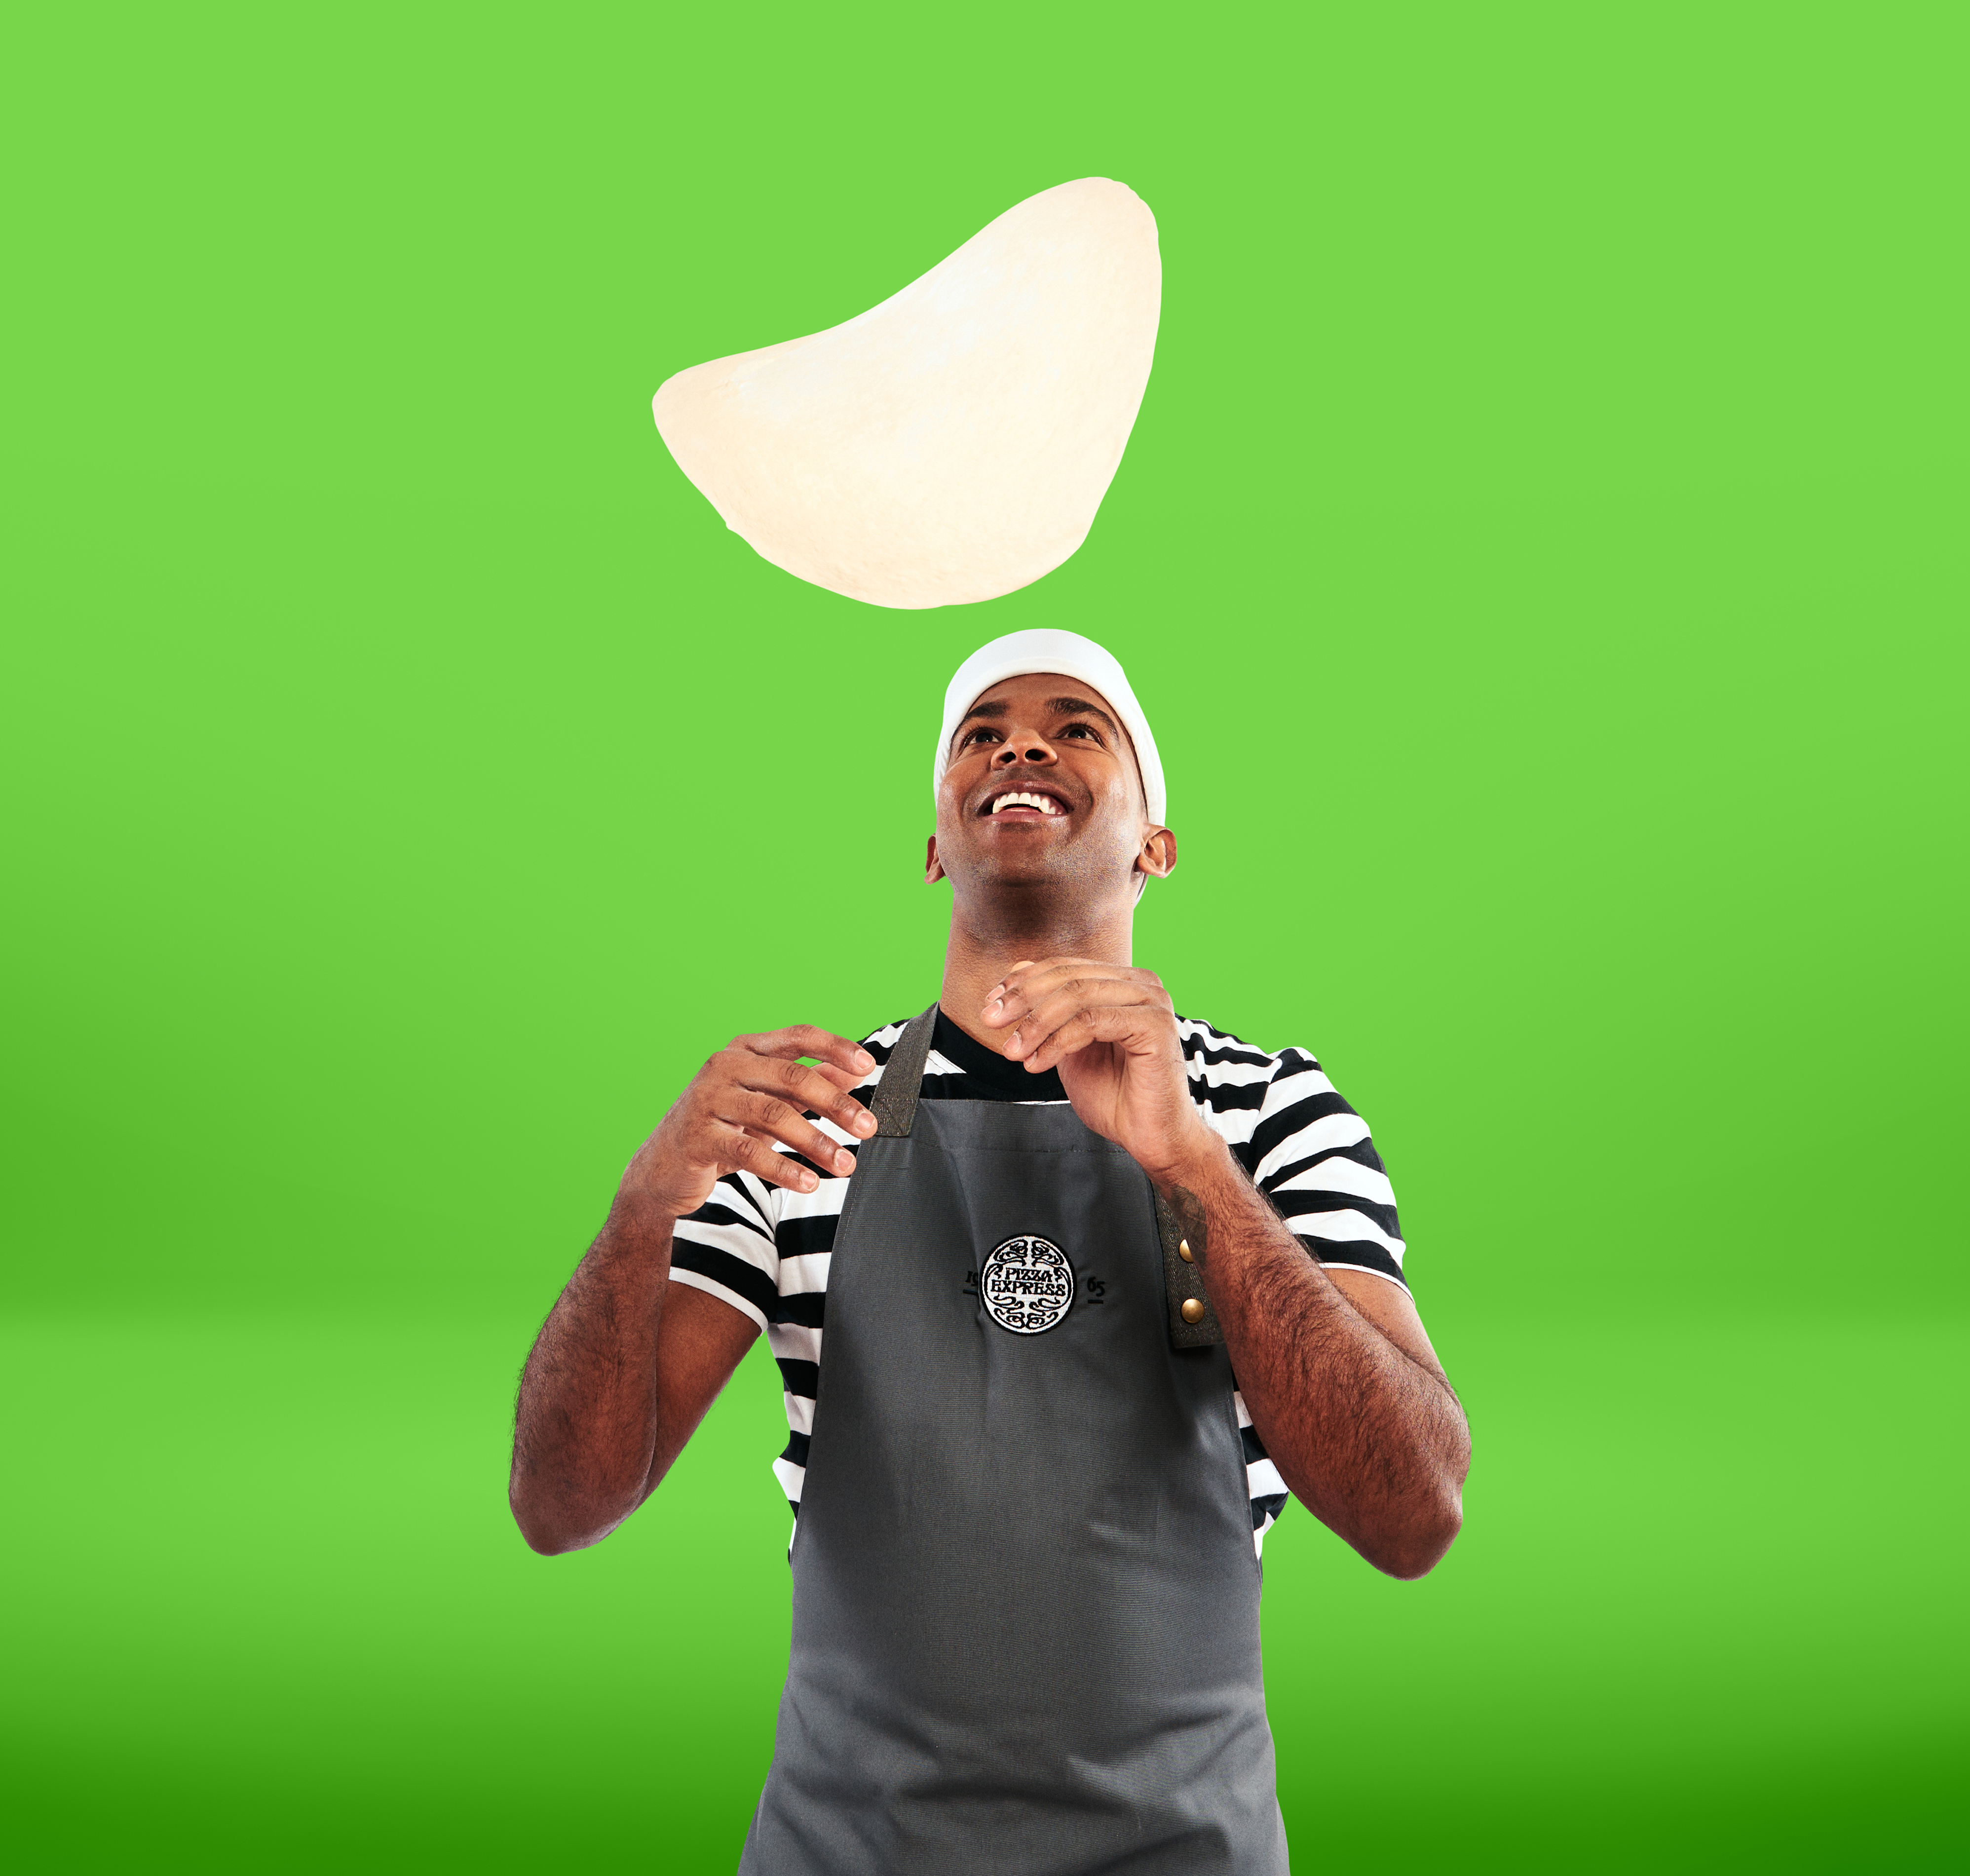 Elbis Avila from PizzaExpress tossing pizza in front of a light green background